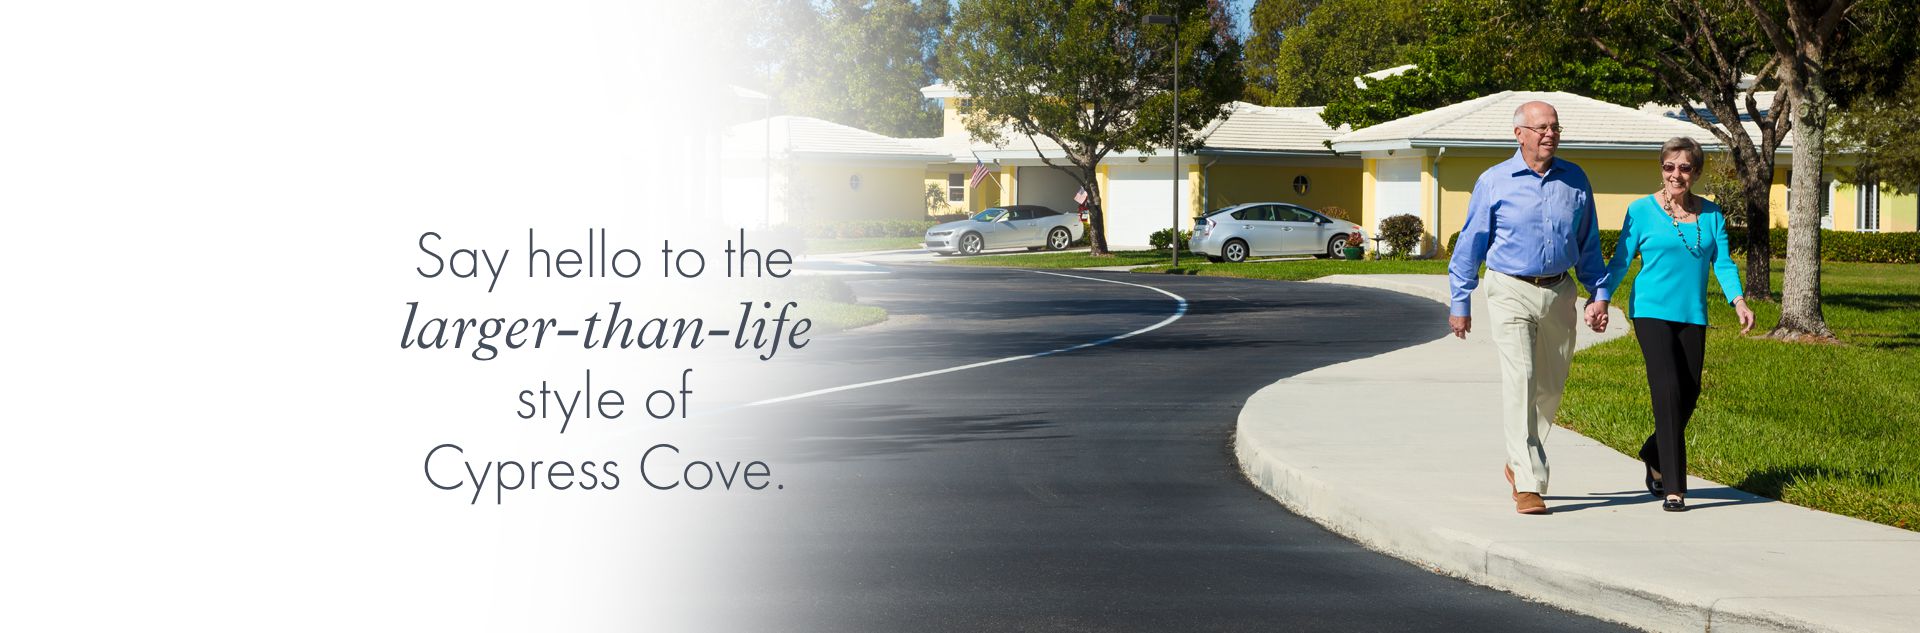 Say hello to the larger-than-life style of  Cypress Cove.